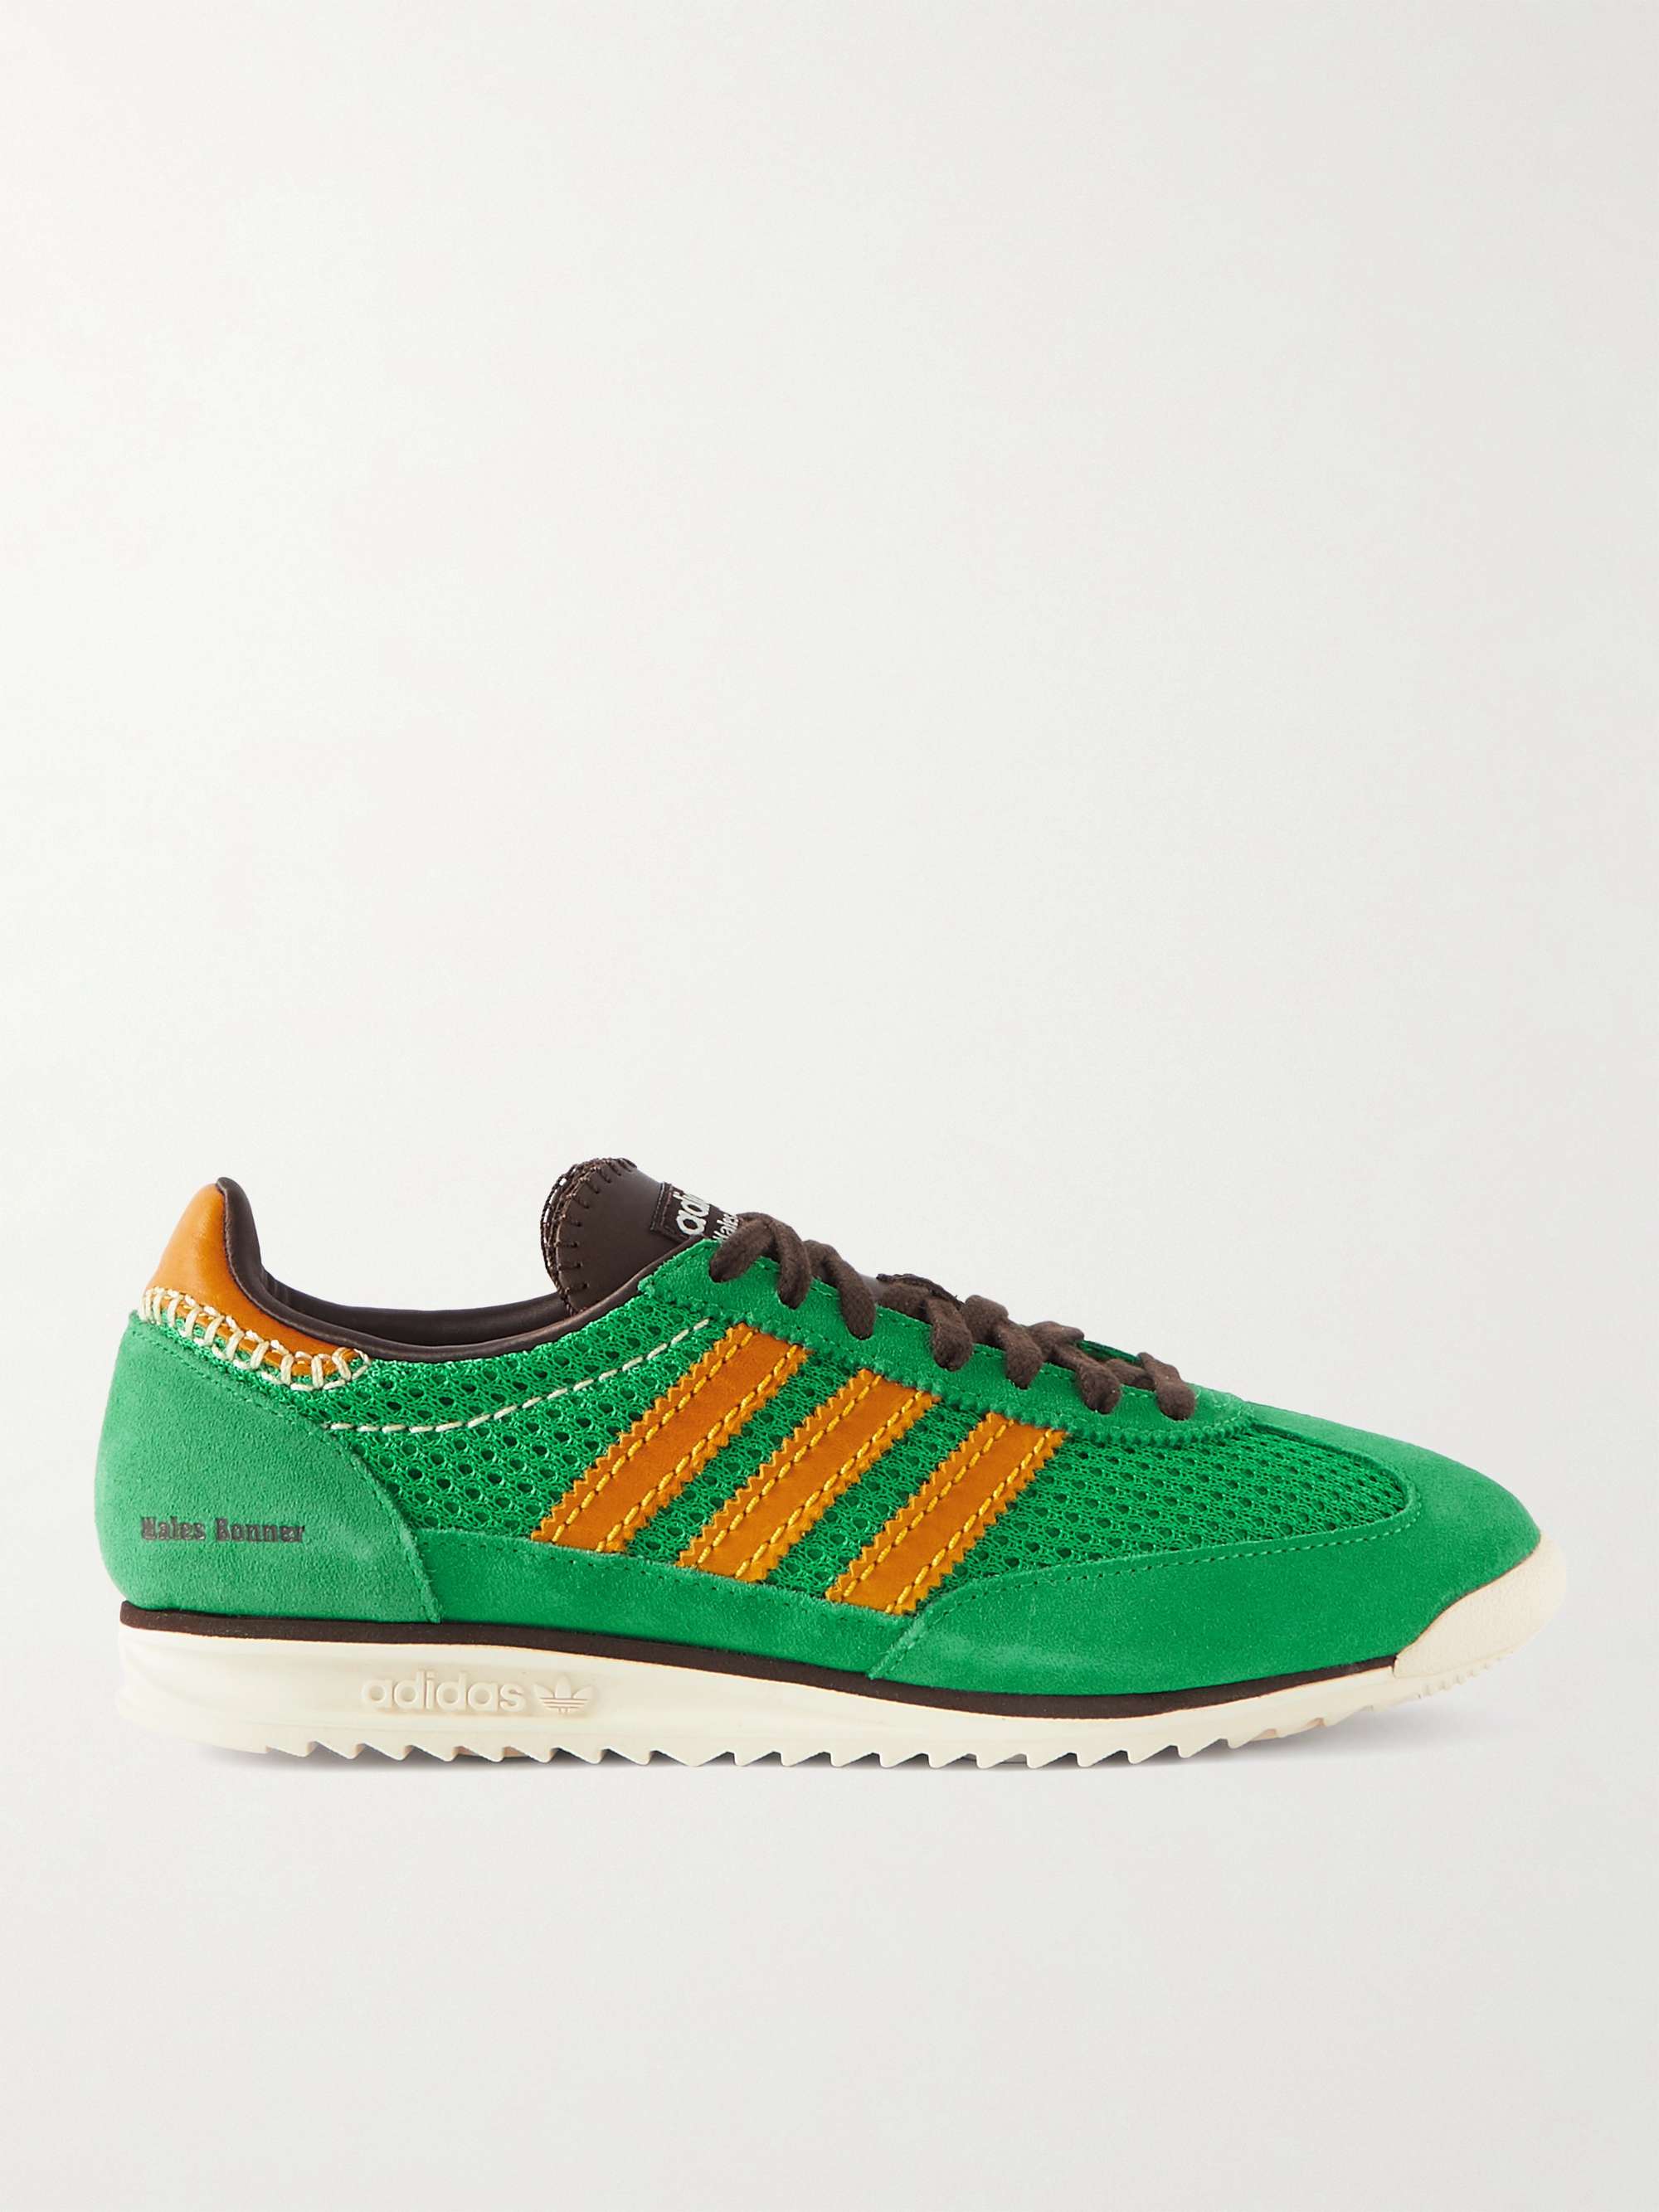 ADIDAS CONSORTIUM + Wales Bonner SL72 Suede and Mesh Sneakers for Men ...